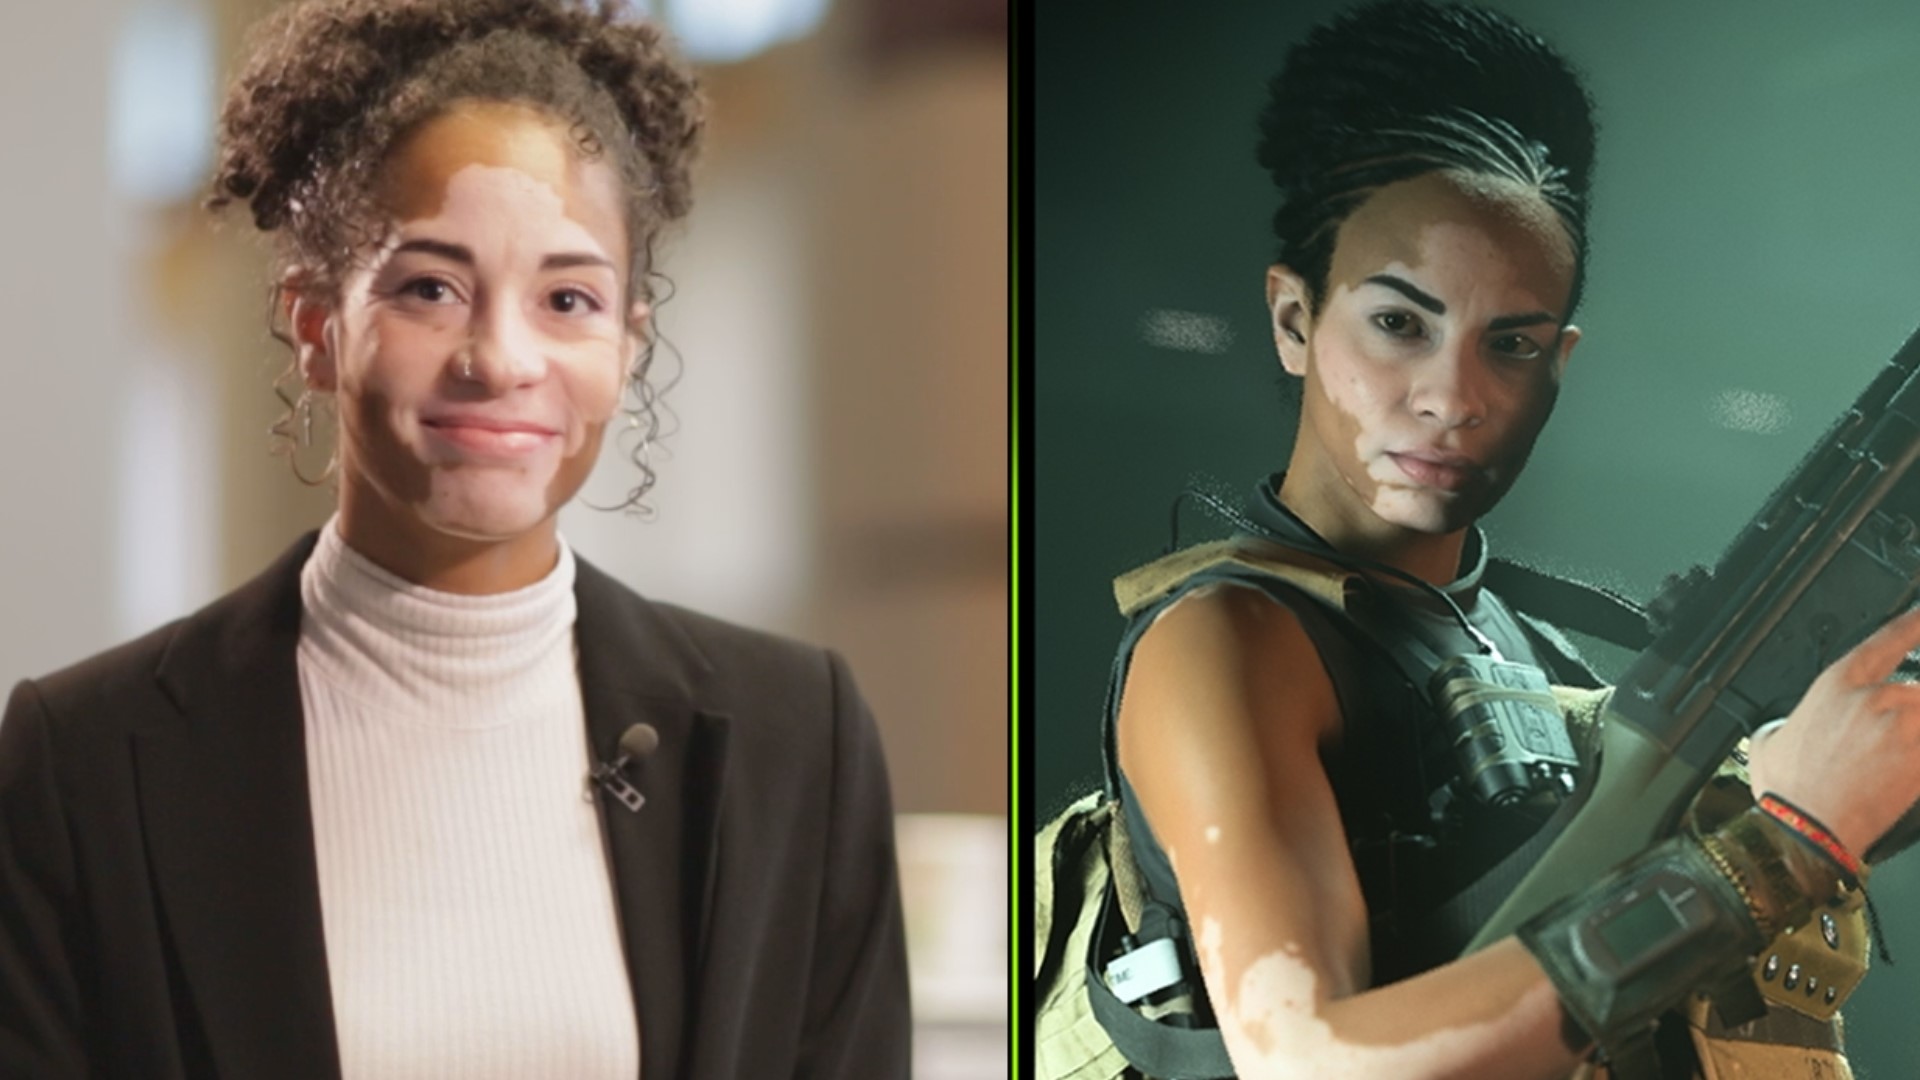 Abena, who lives with a skin condition that changed her image, modeled for a new Call of Duty character named Nova.